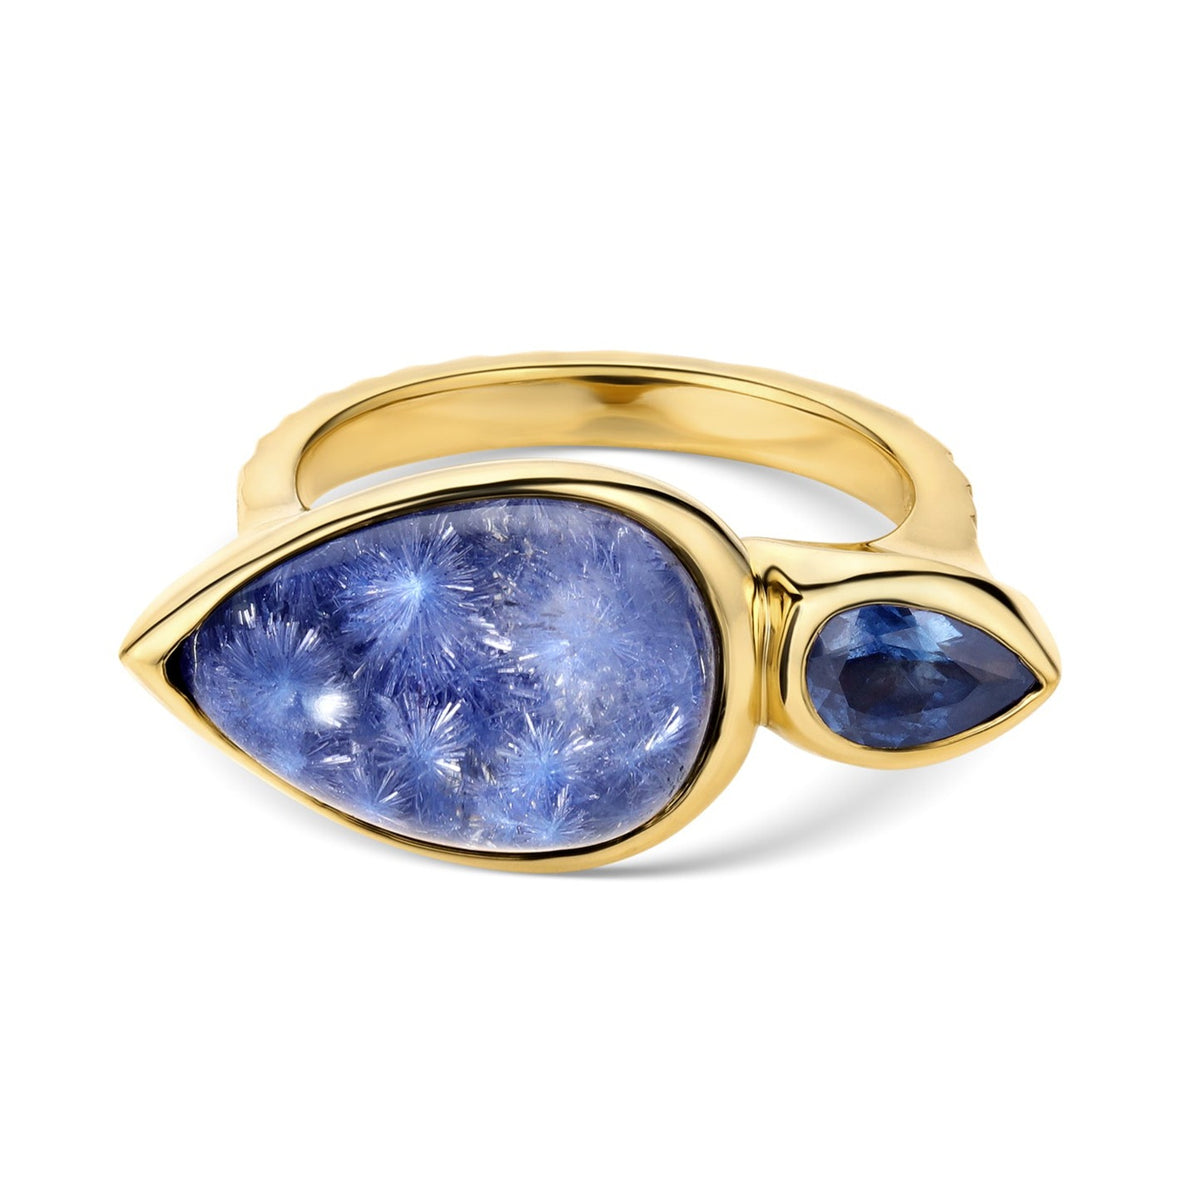 Once In a Blue World - Dumortierite and Montana Sapphire Ring